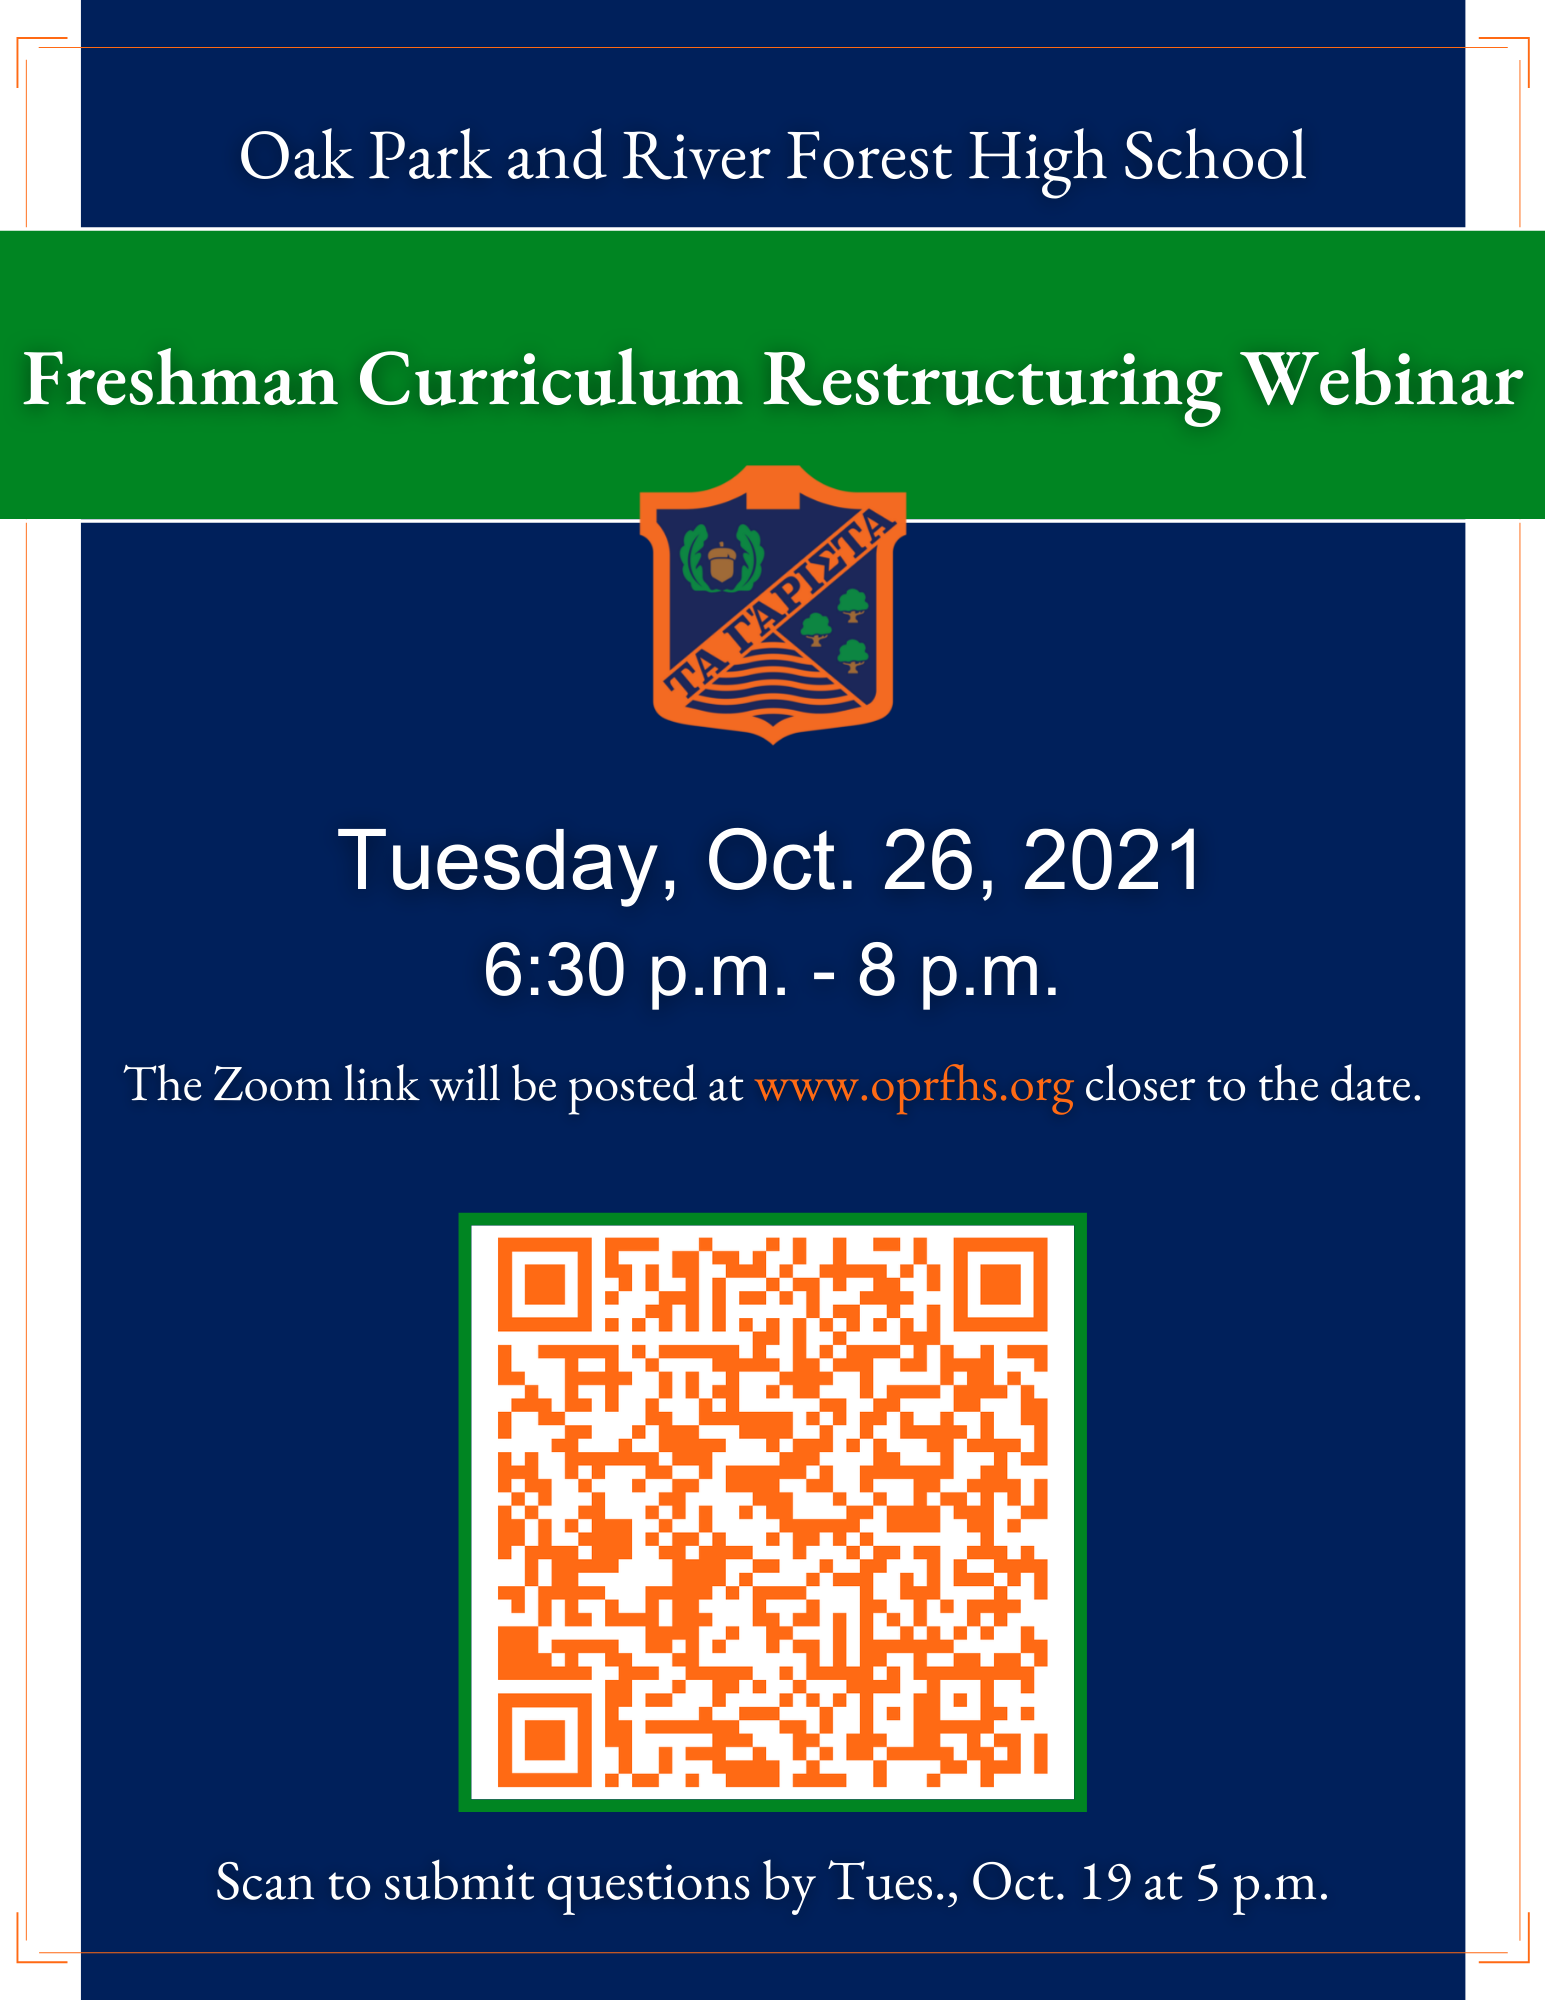 CLICK HERE - Freshman Curriculum Restructuring Webinar on Oct. 26, 6:30 p.m. to 8 p.m.